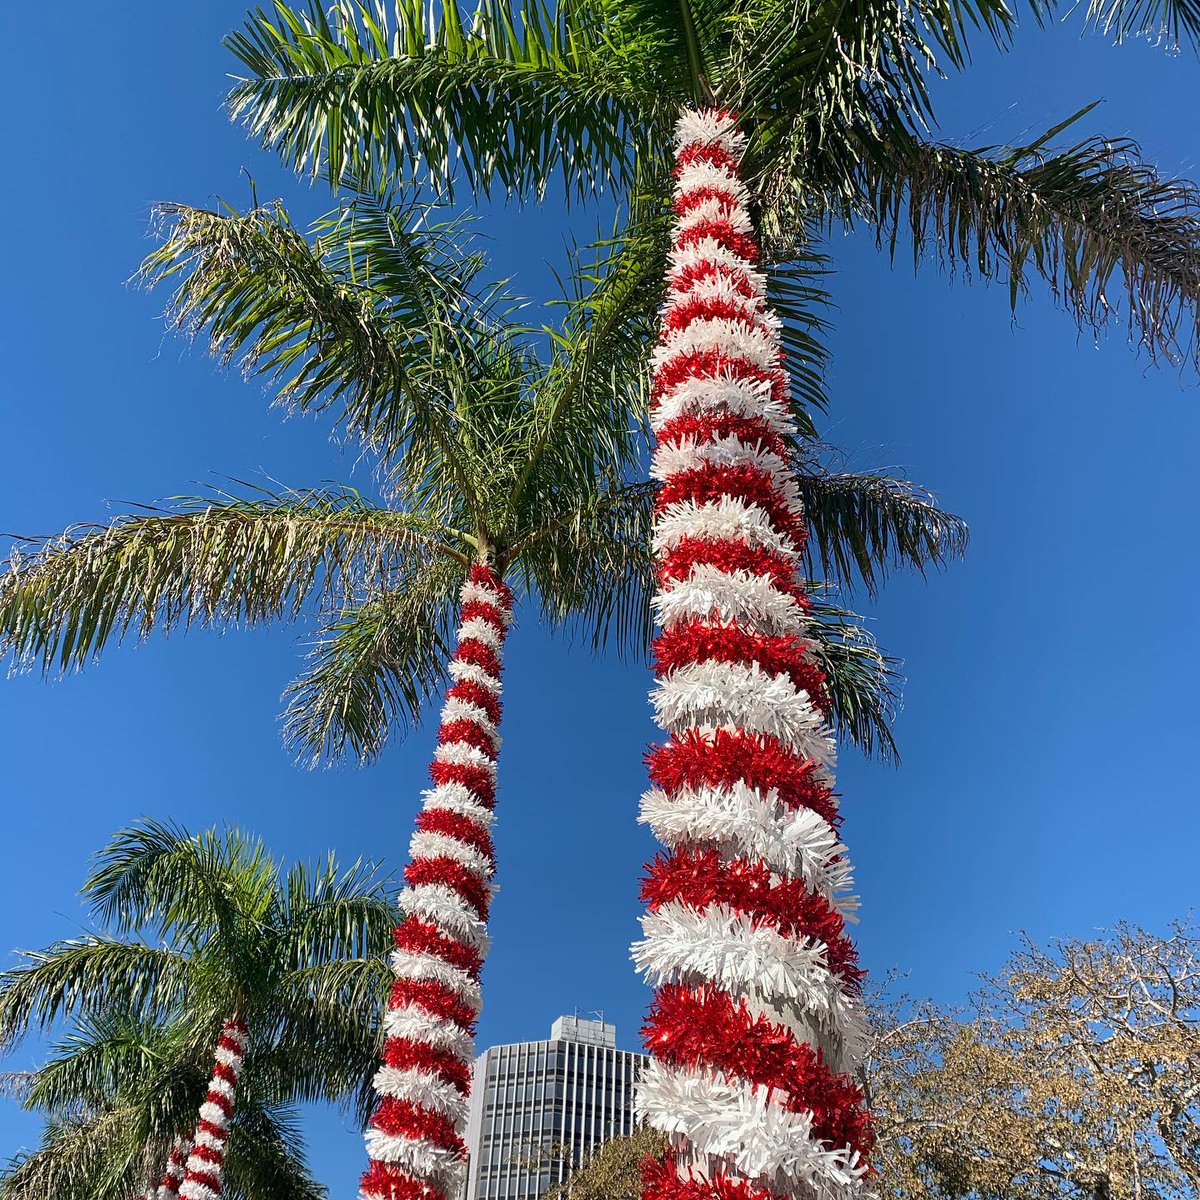 St. Pete loves to decorate for the holidays, and we love to show it off! Get into the Christmas spirit by joining us for our upcoming tour of Downtown on the 13th at 11AM.

#thingstodostpete #thingstodostpetebeach #buybeachesfirst #carfreestpete #stpeterising #stpeteisawesome